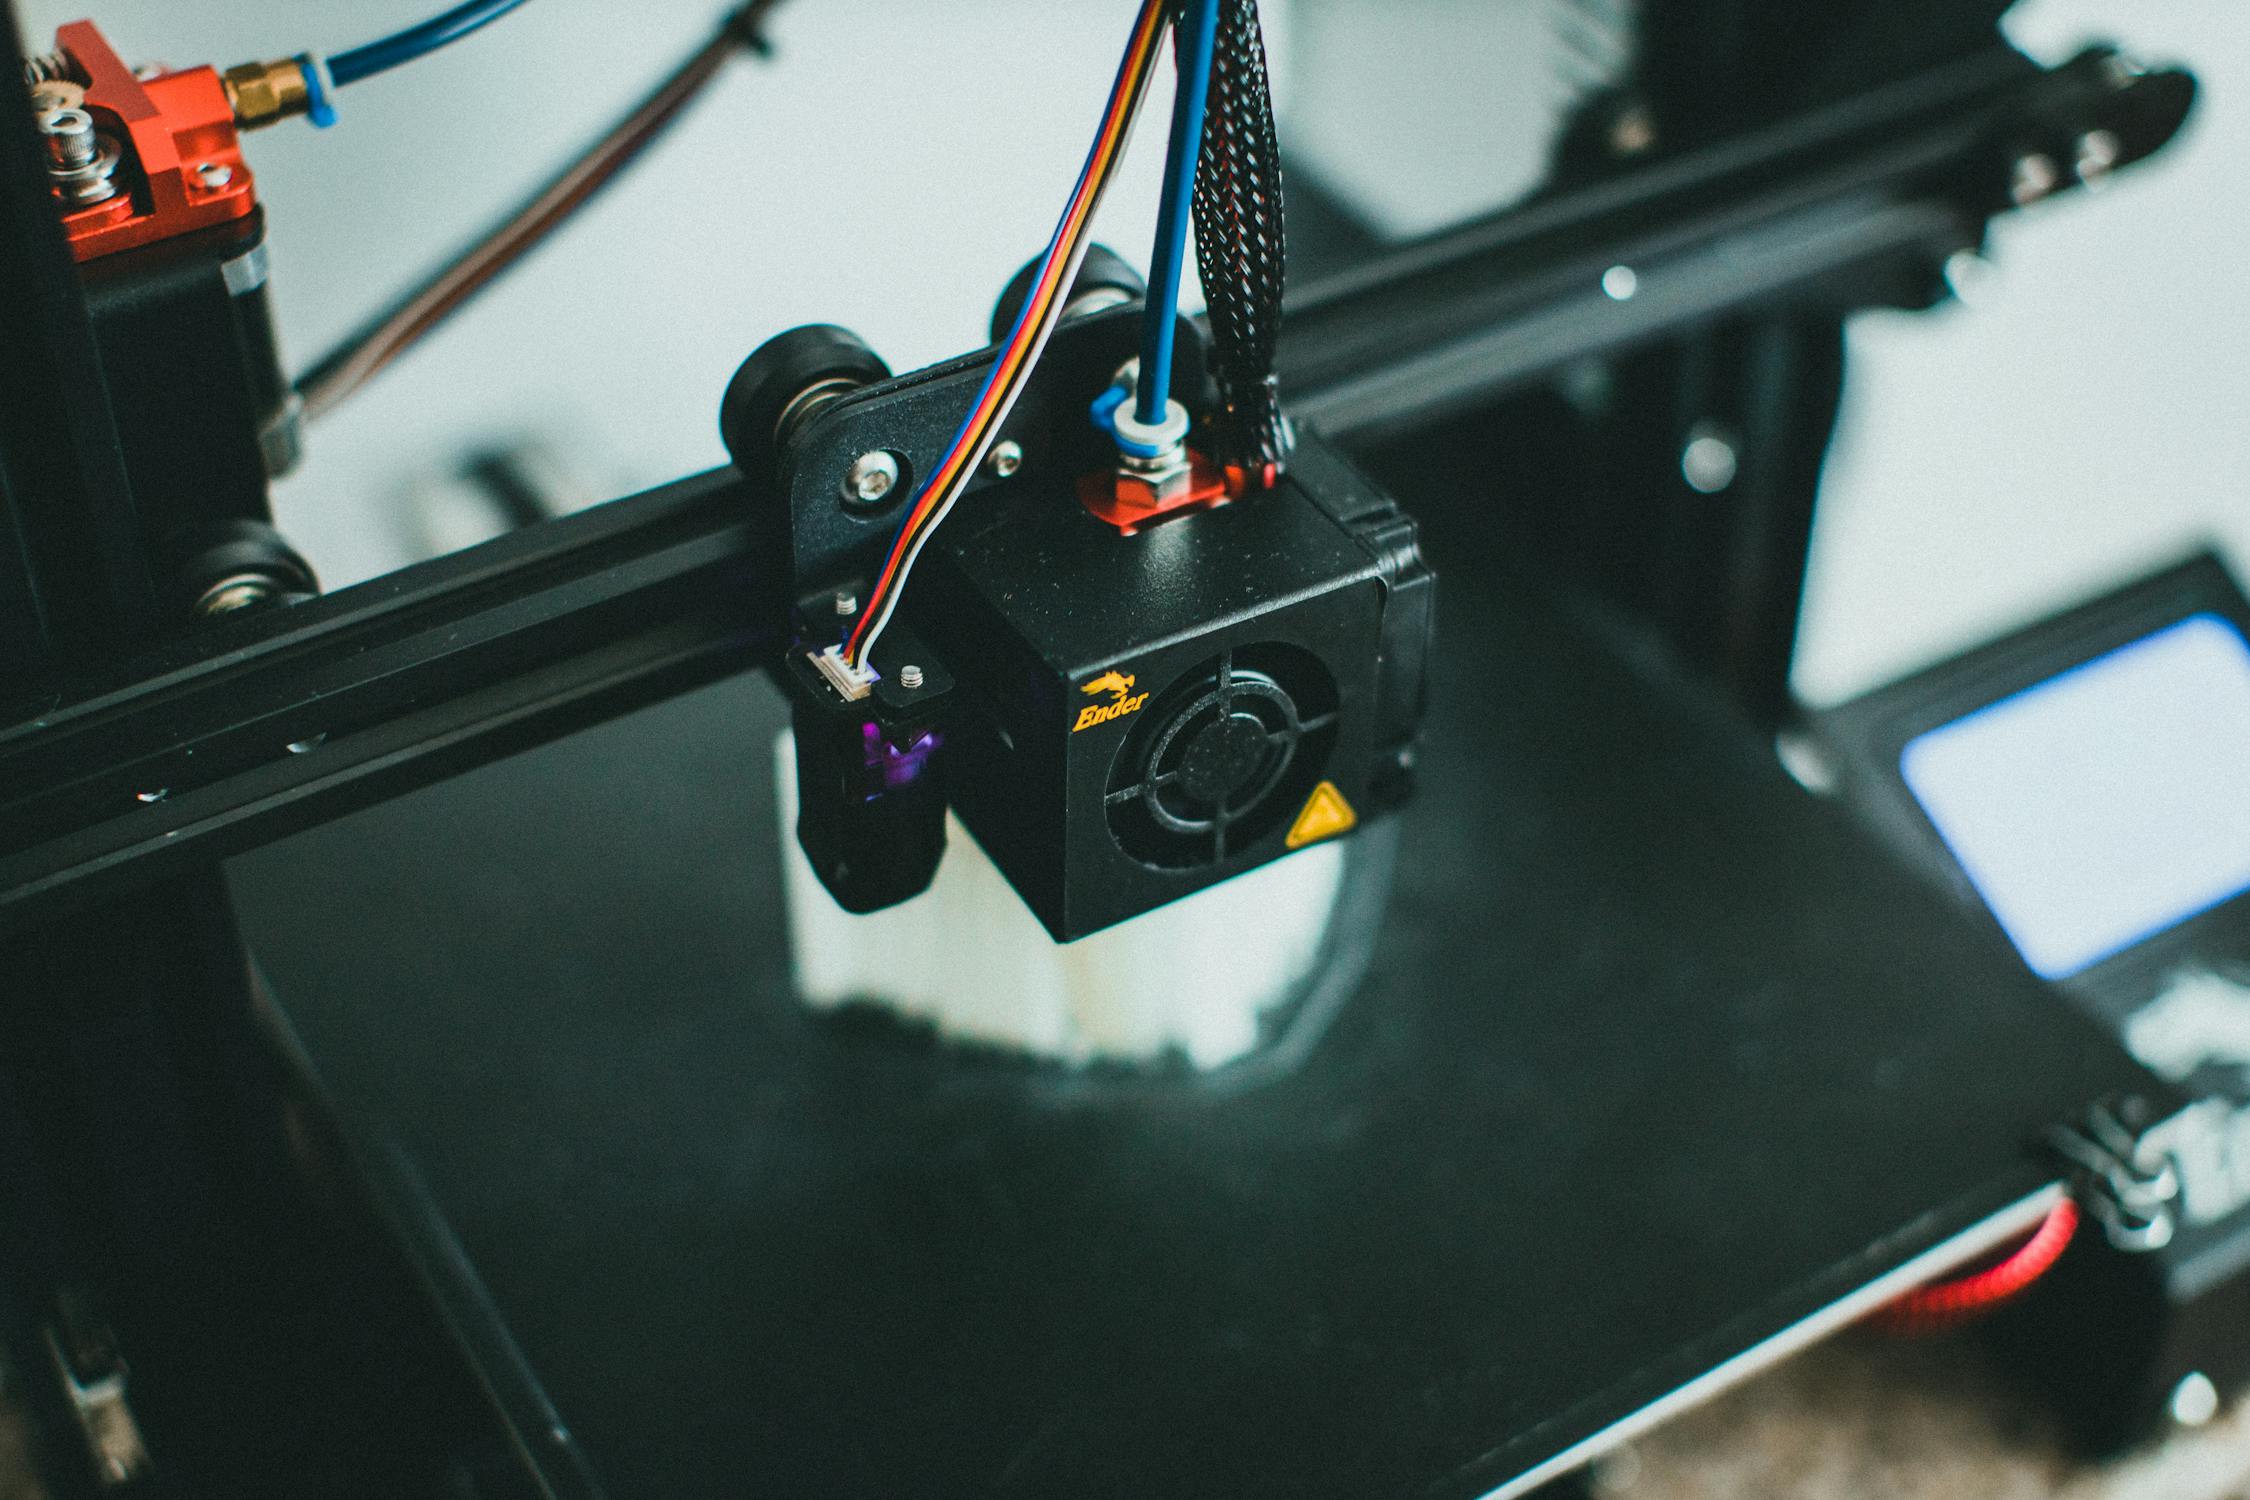 Exploring New Frontiers in Plastics: Revolutionizing 3D Printing TechnologyIntroduction